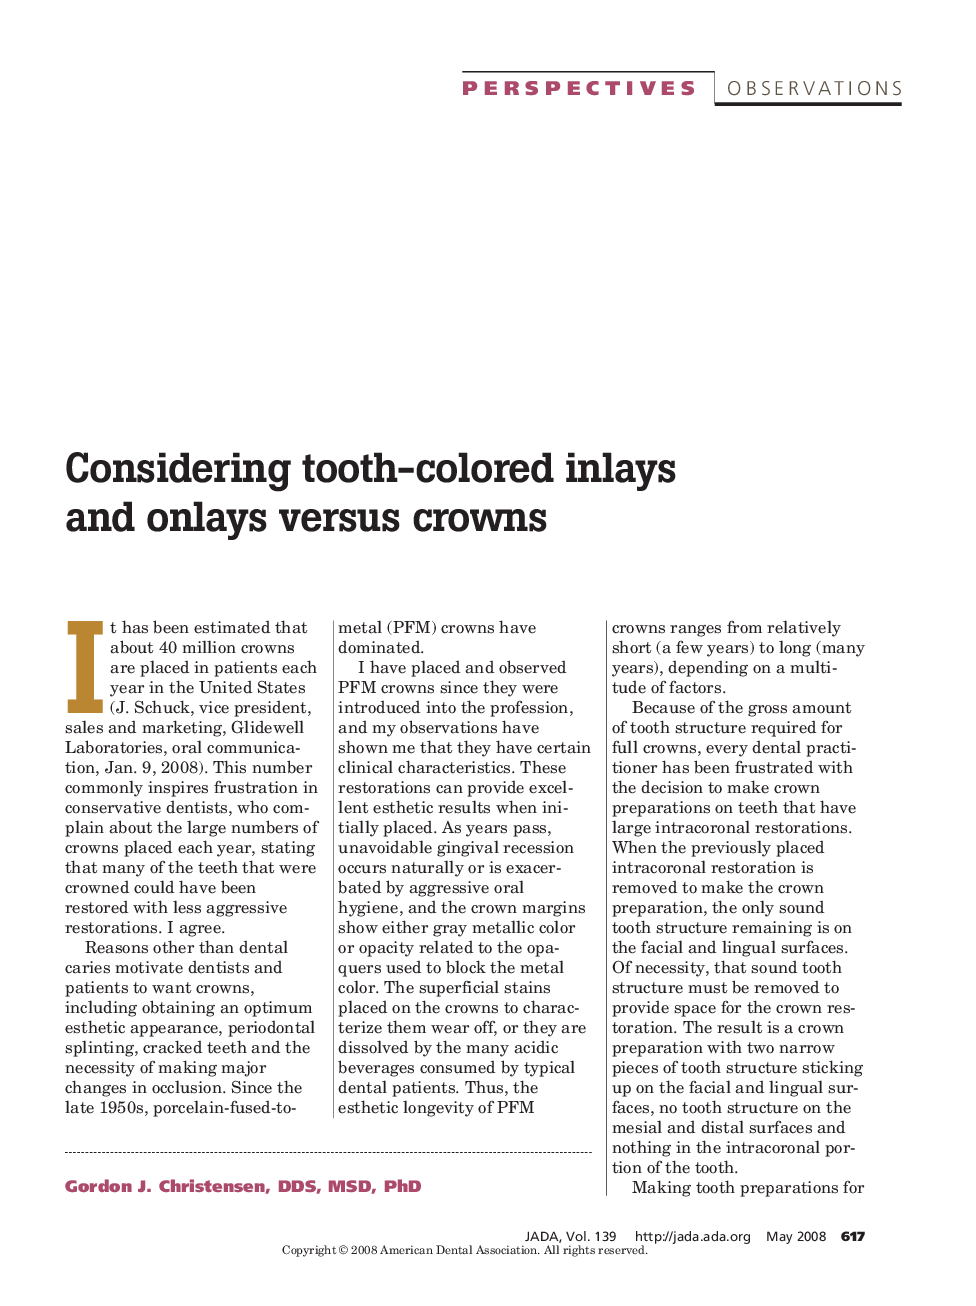 Considering Tooth-Colored Inlays and Onlays Versus Crowns